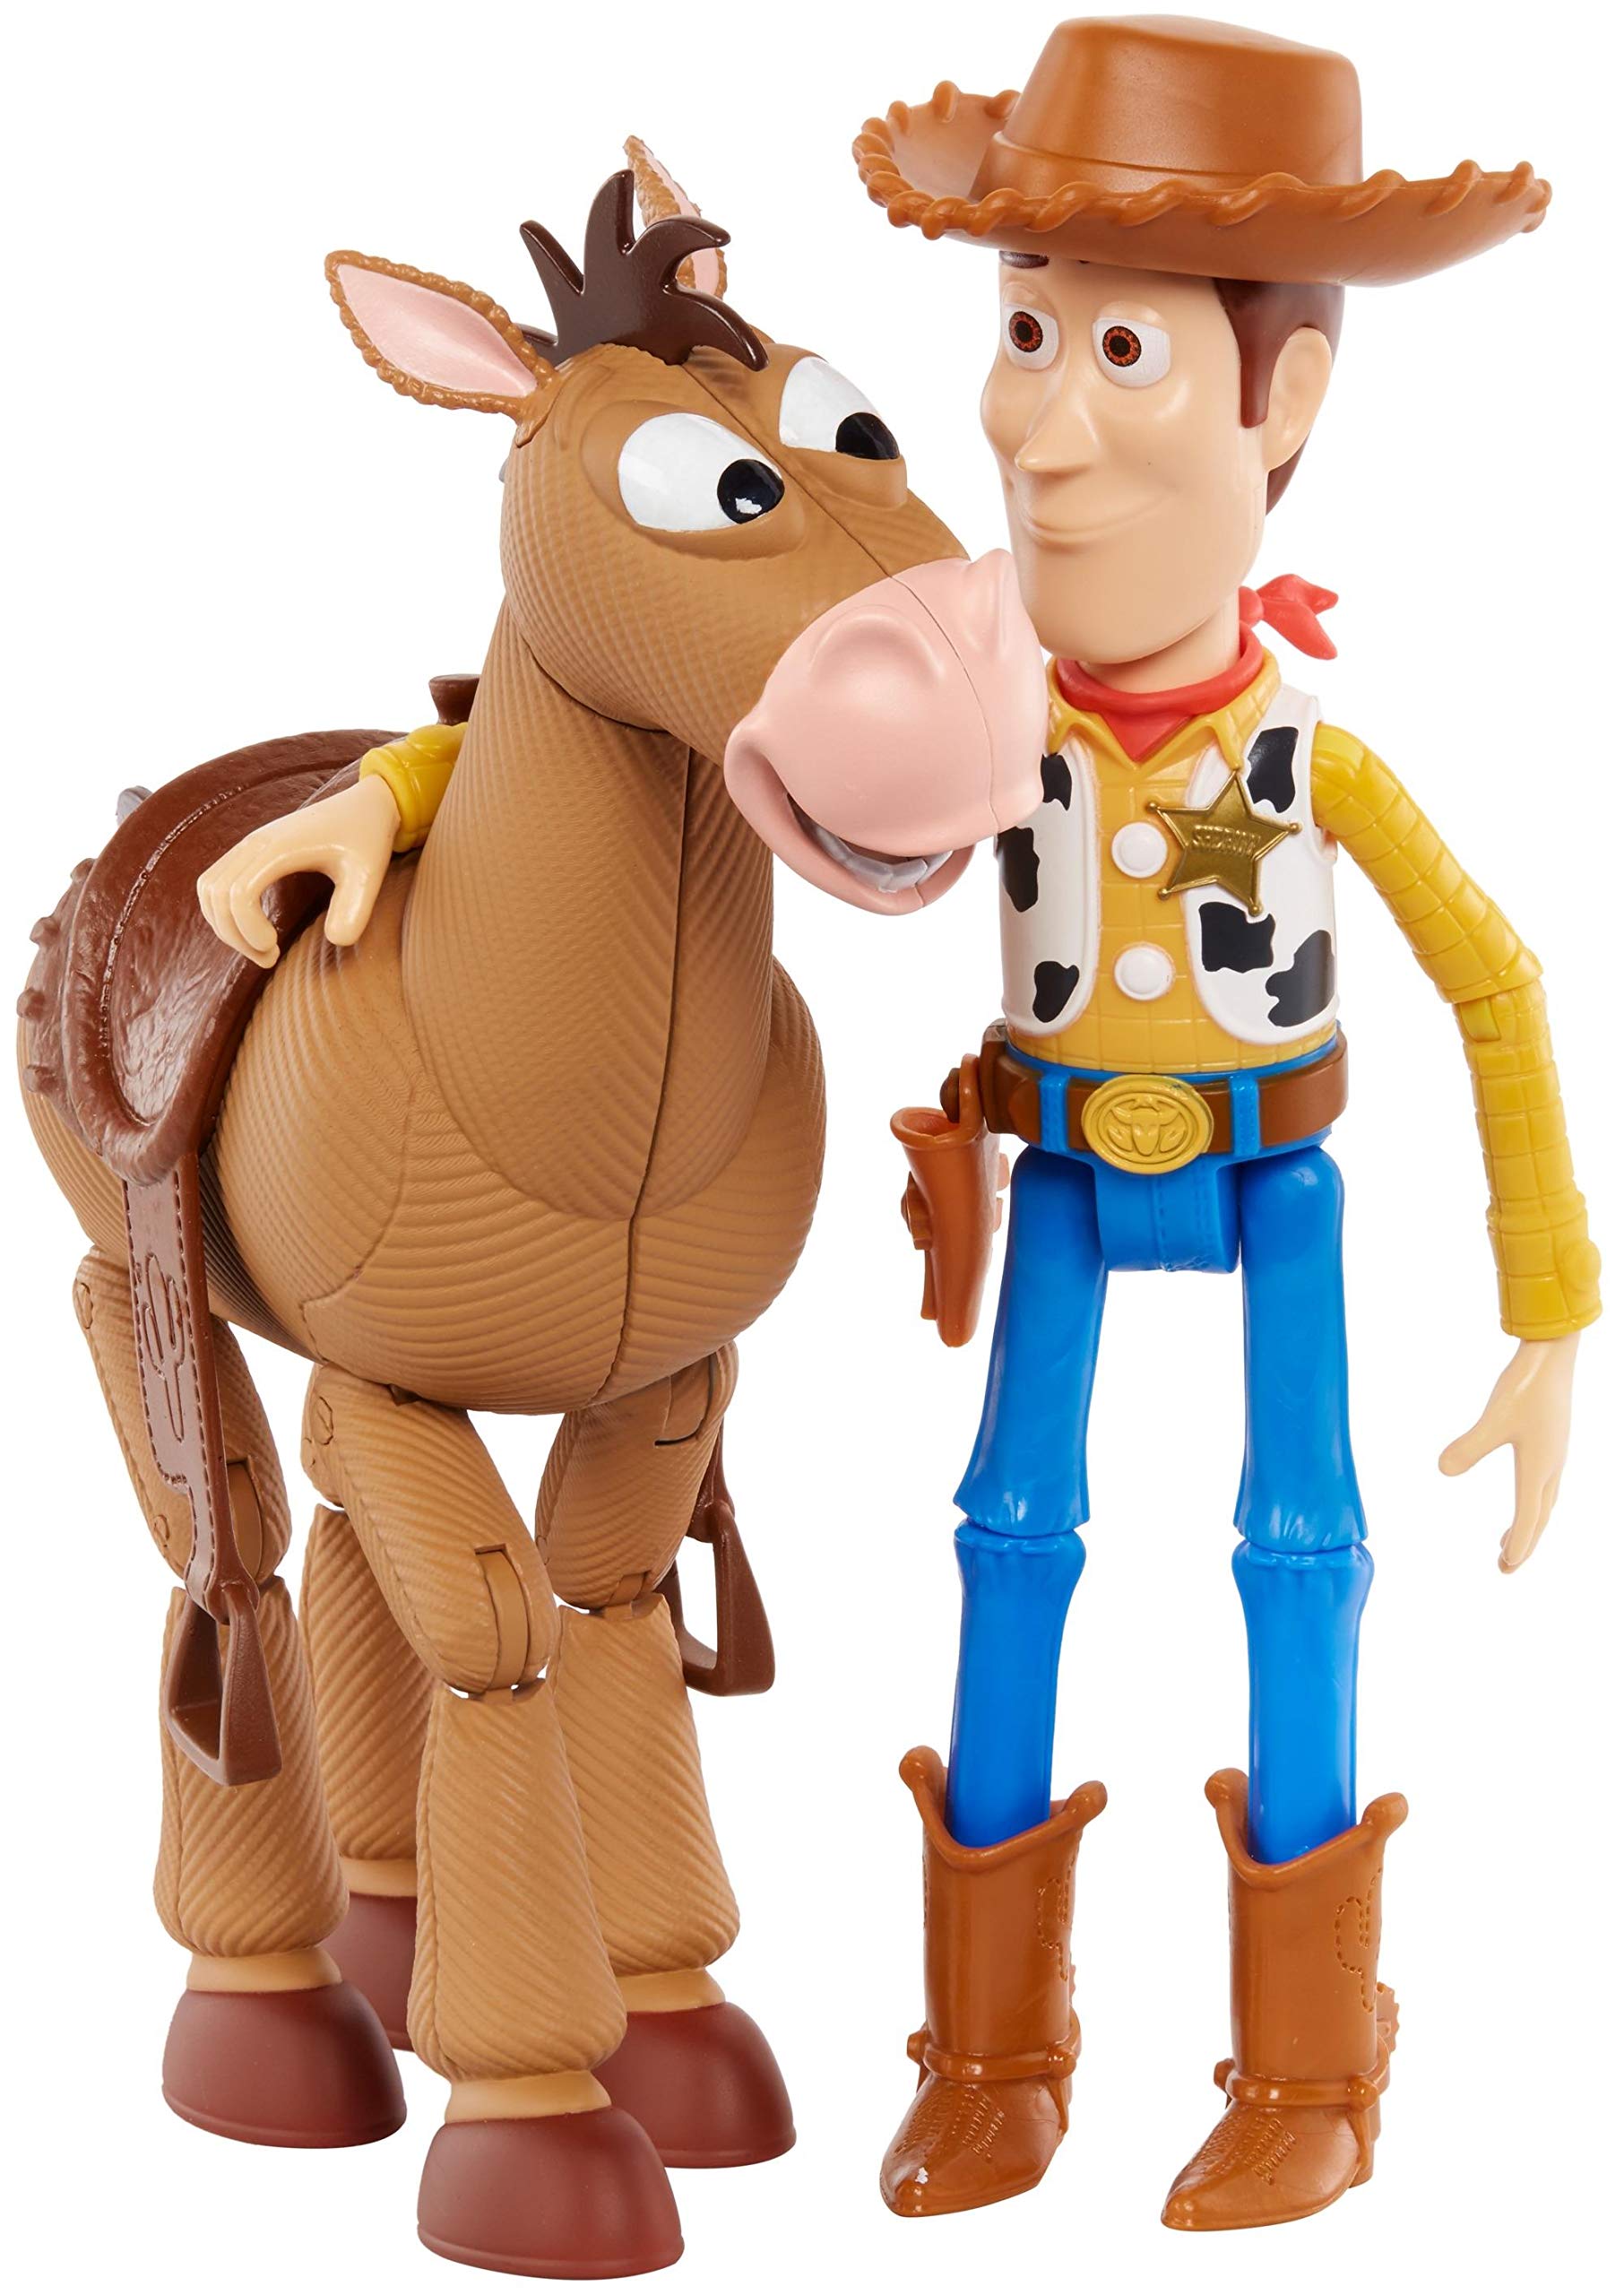 Disney Pixar's Toy Story 4 Woody and Buzz Lightyear 2-Character Pack, Movie-inspired Relative-Scale for Storytelling Play